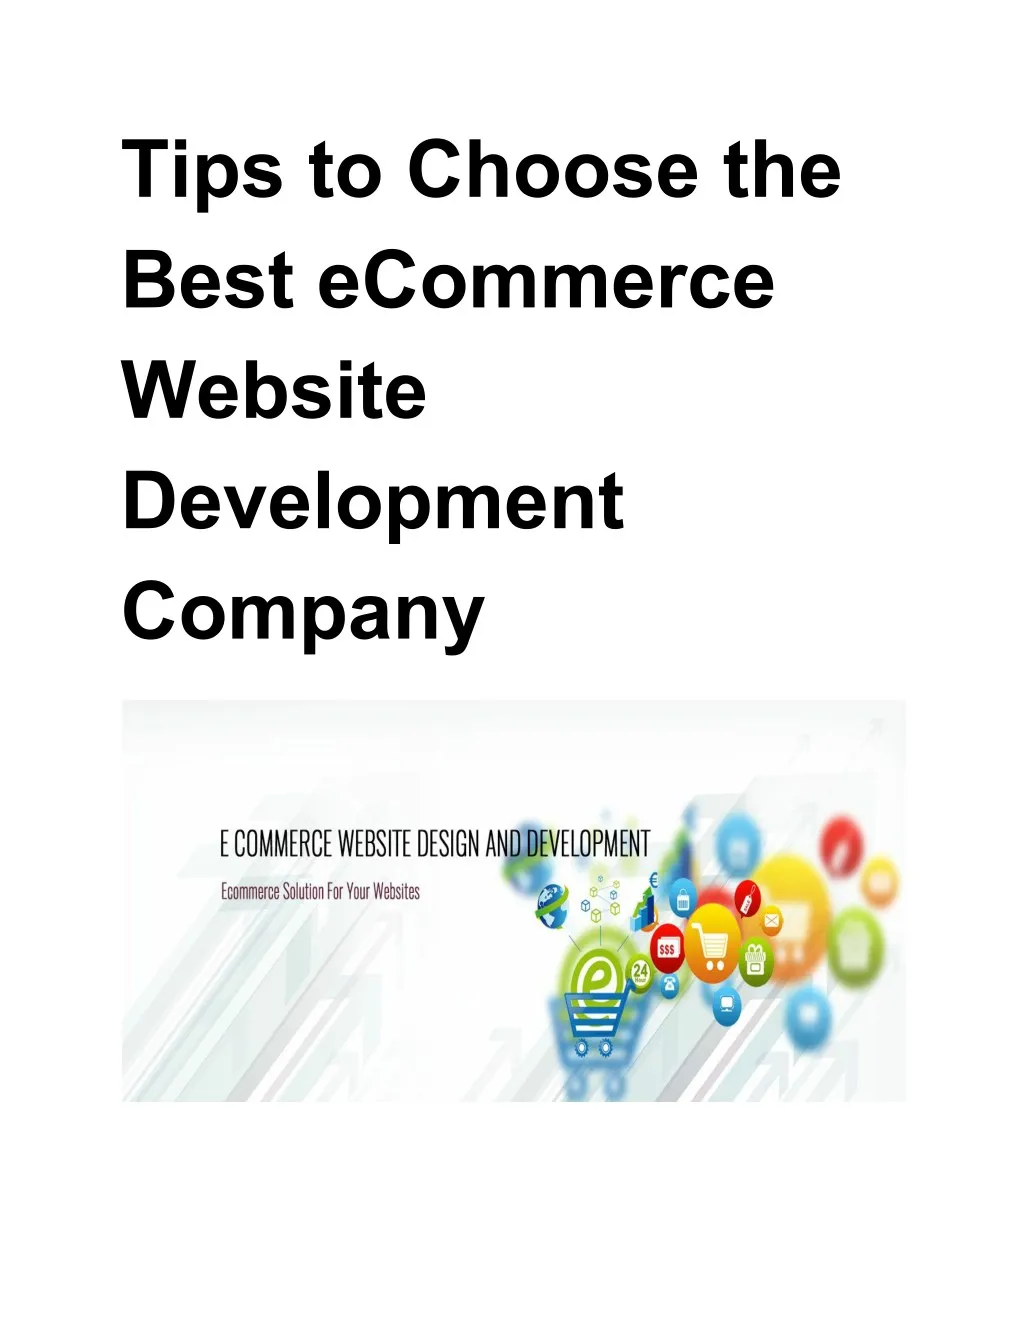 tips to choose the best ecommerce website